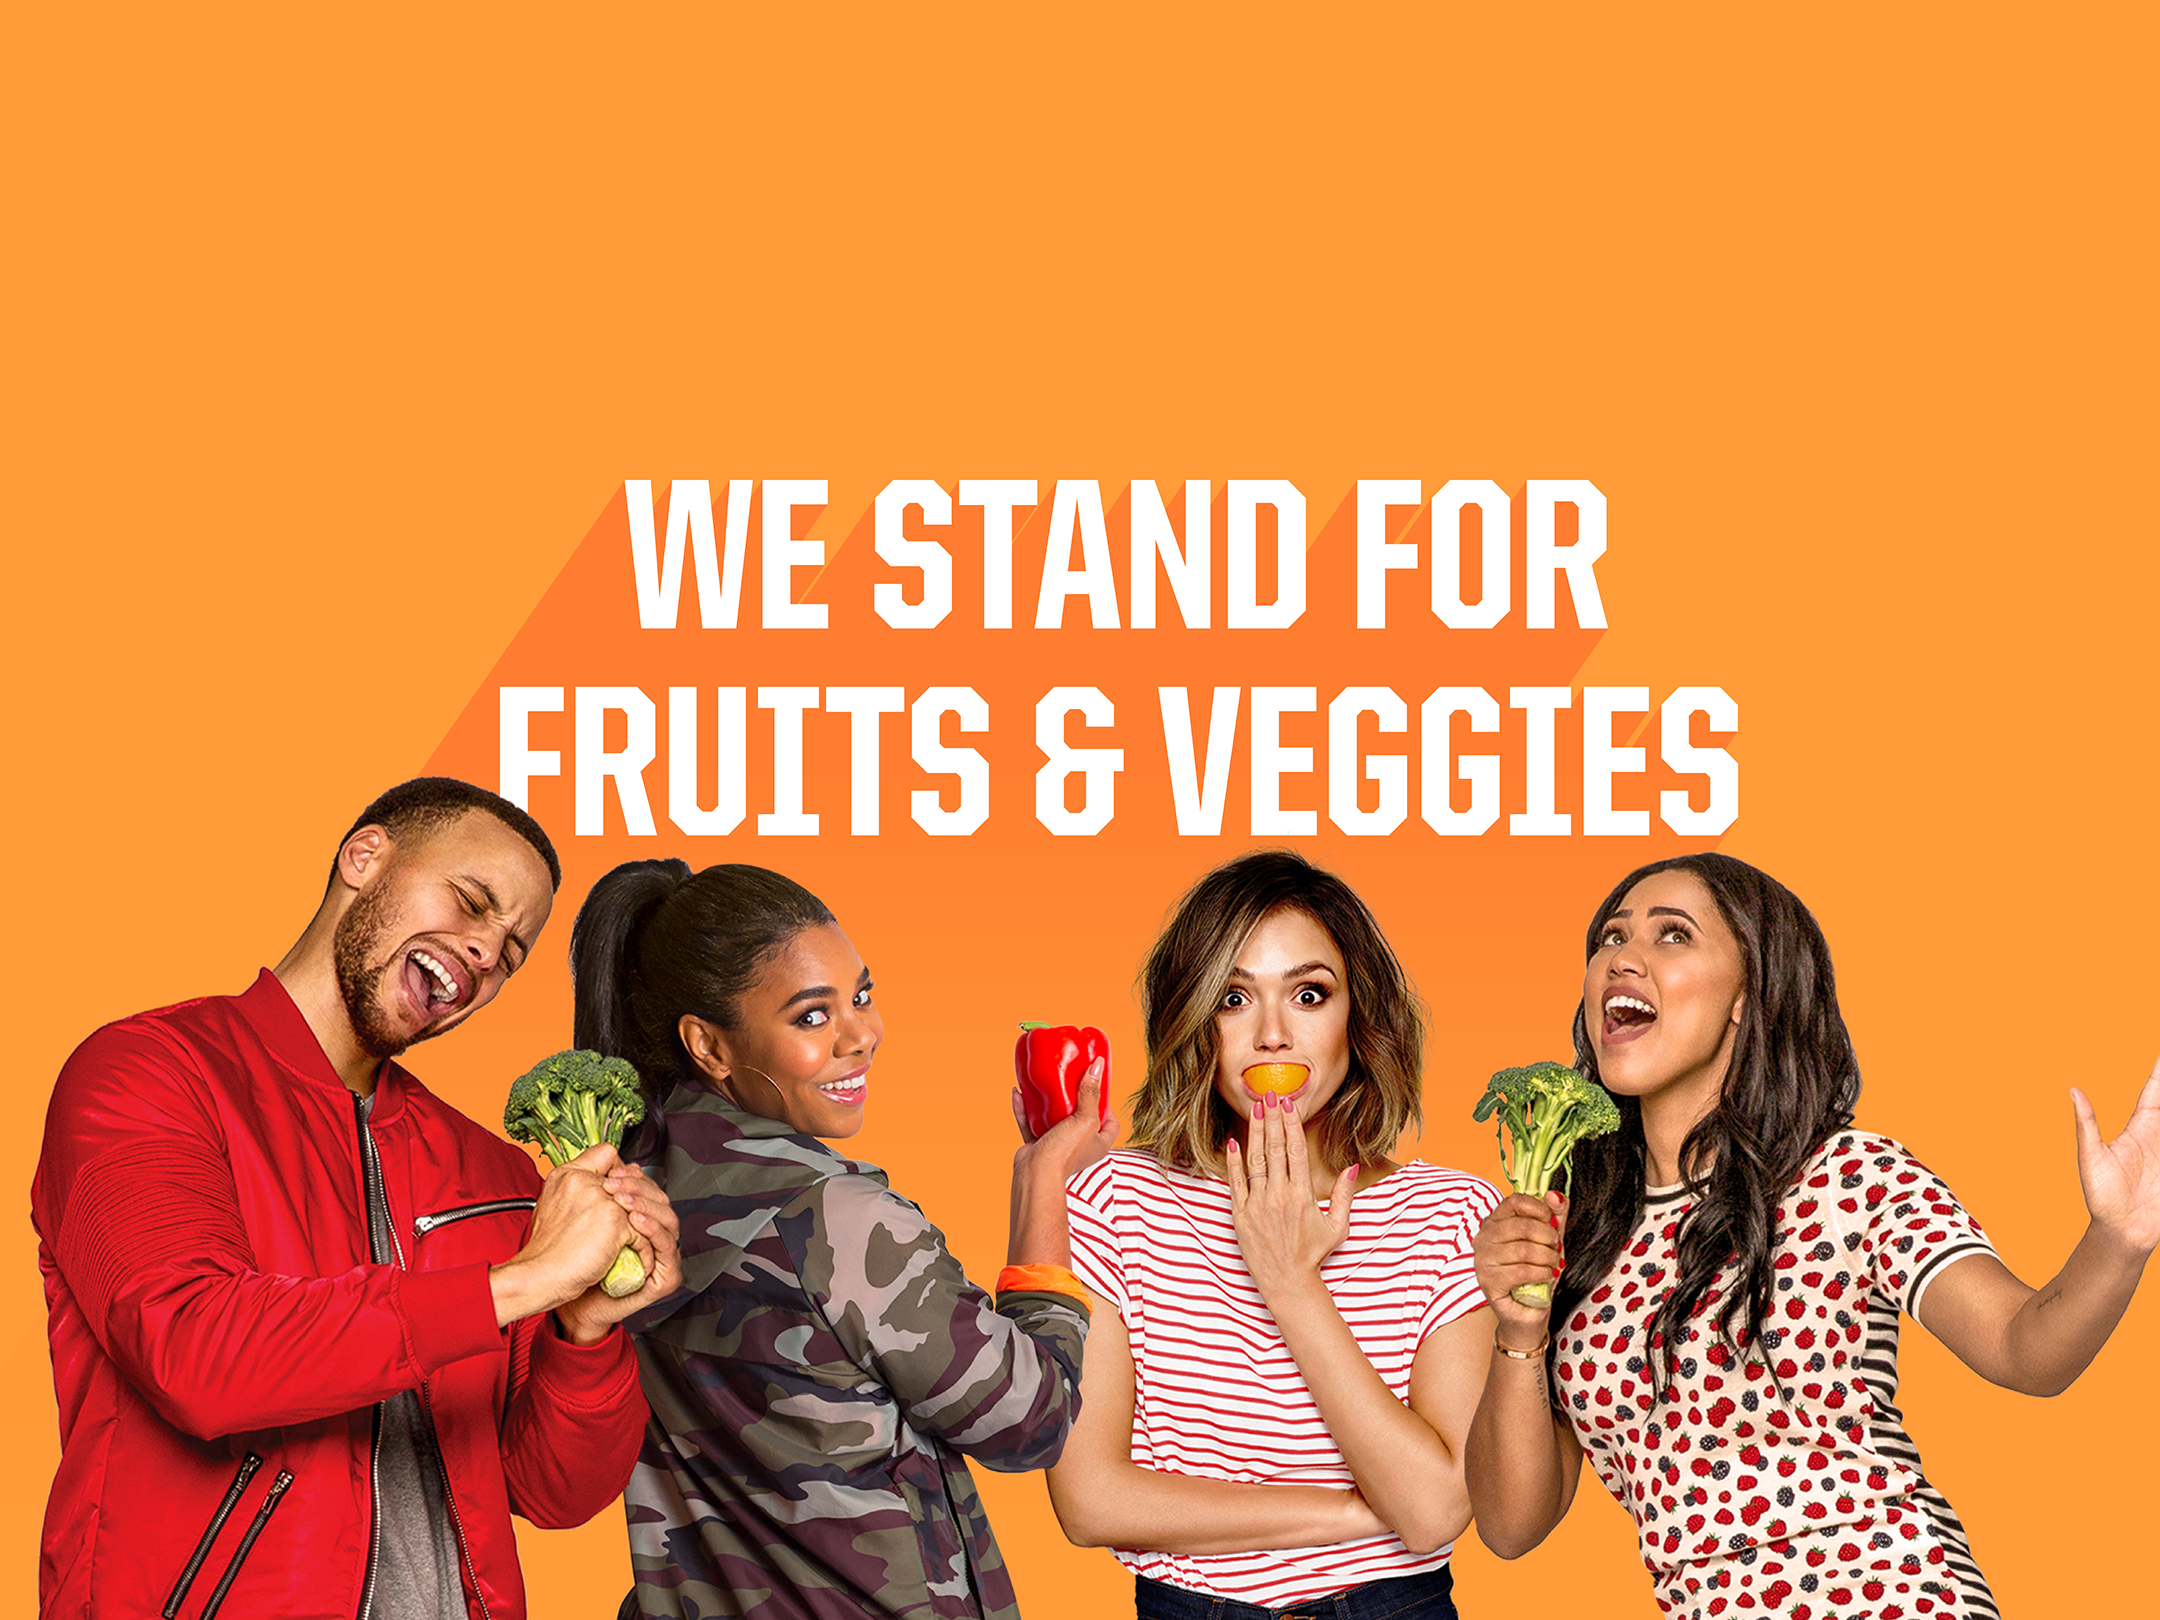 We stand for fuits and veggies.